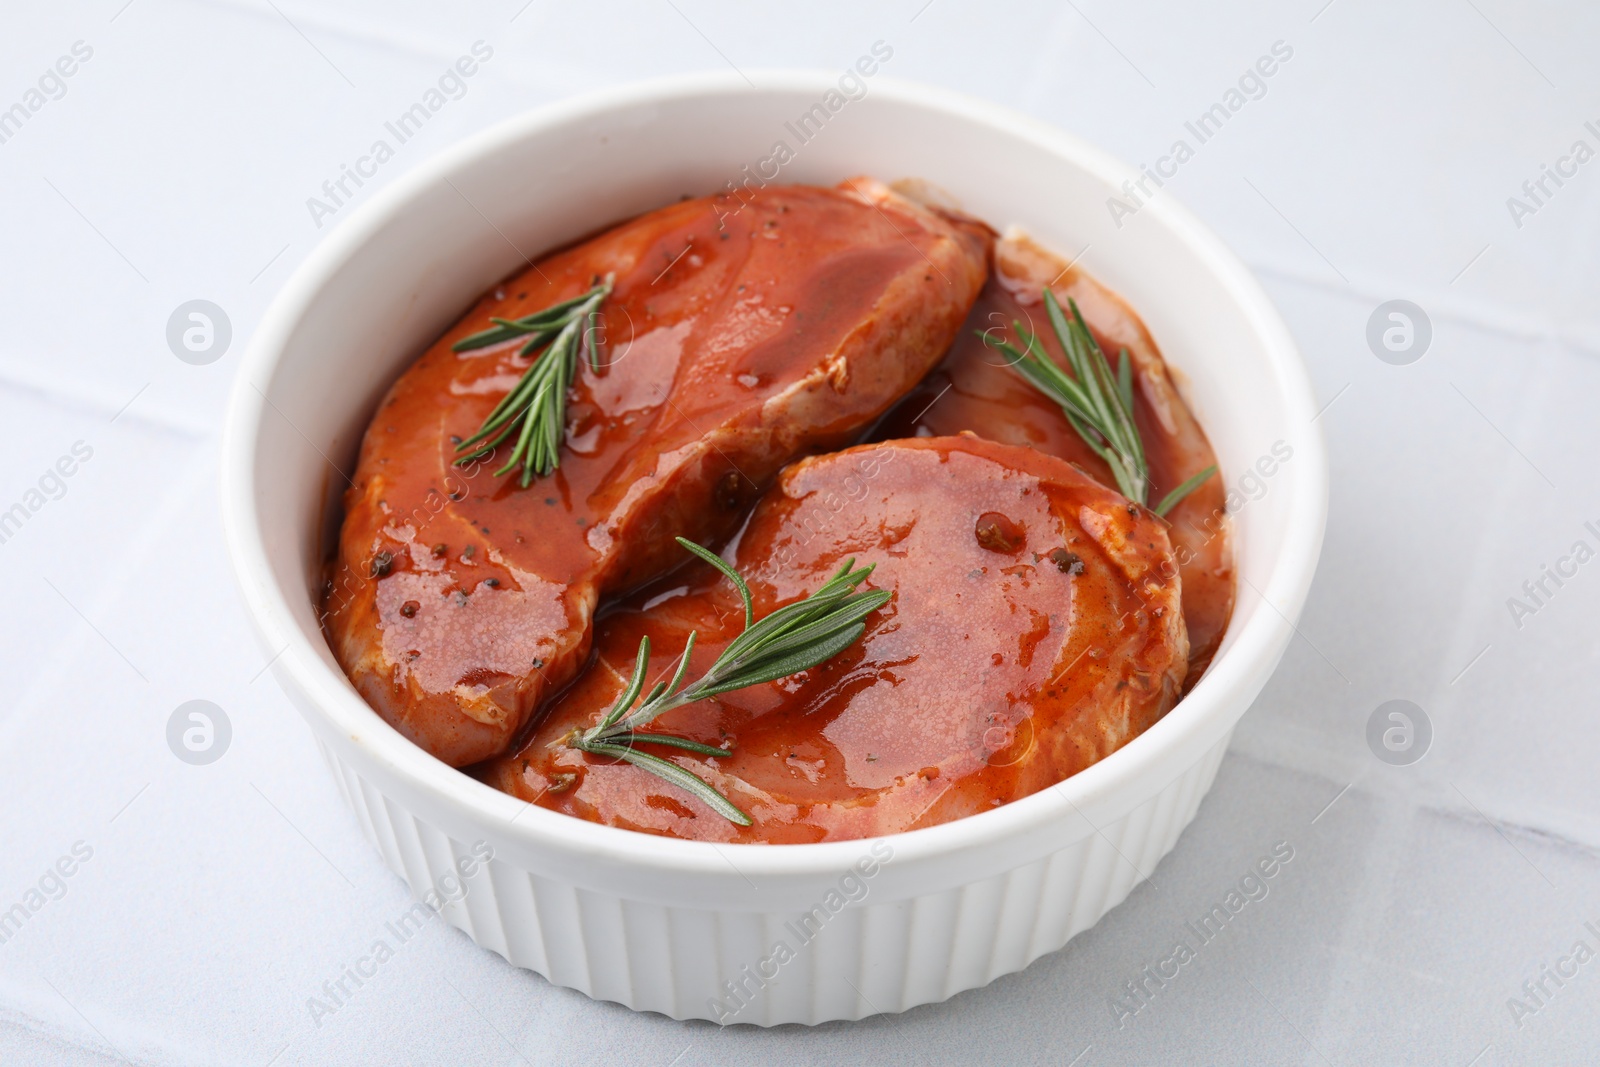 Photo of Raw marinated meat and rosemary in bowl on white tiled table, closeup